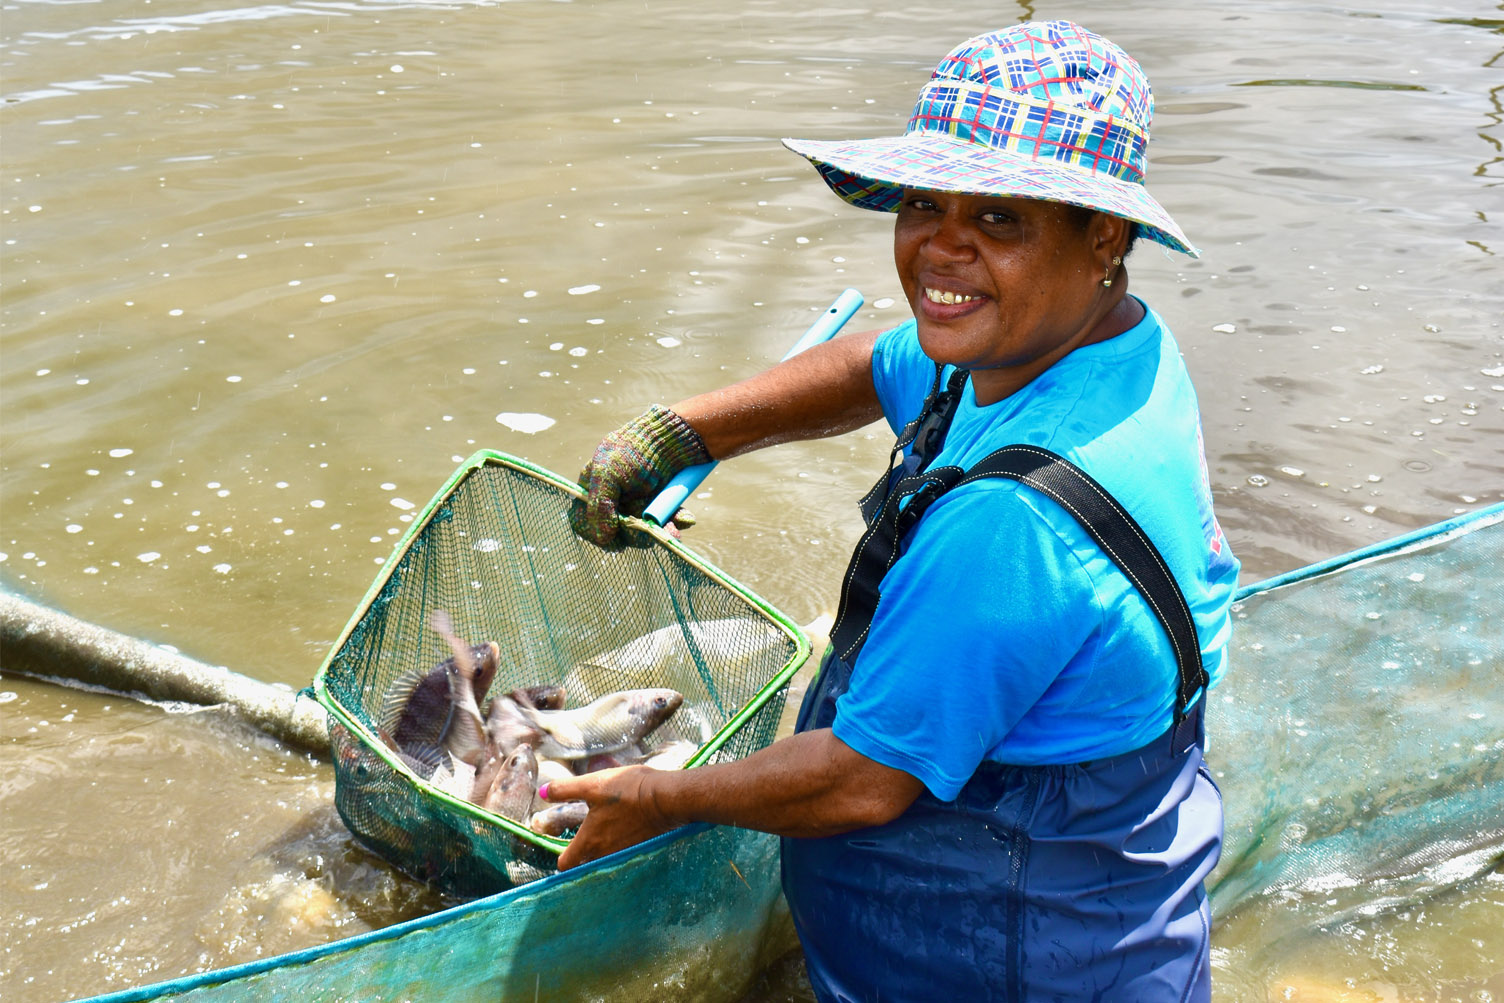 Ms Katarina Baleisuva, the first female Fijian tilapia farmer currently producing and supplying male-only cultured fingerlings (young fish) to semi-commercial and commercial farmers in the country.